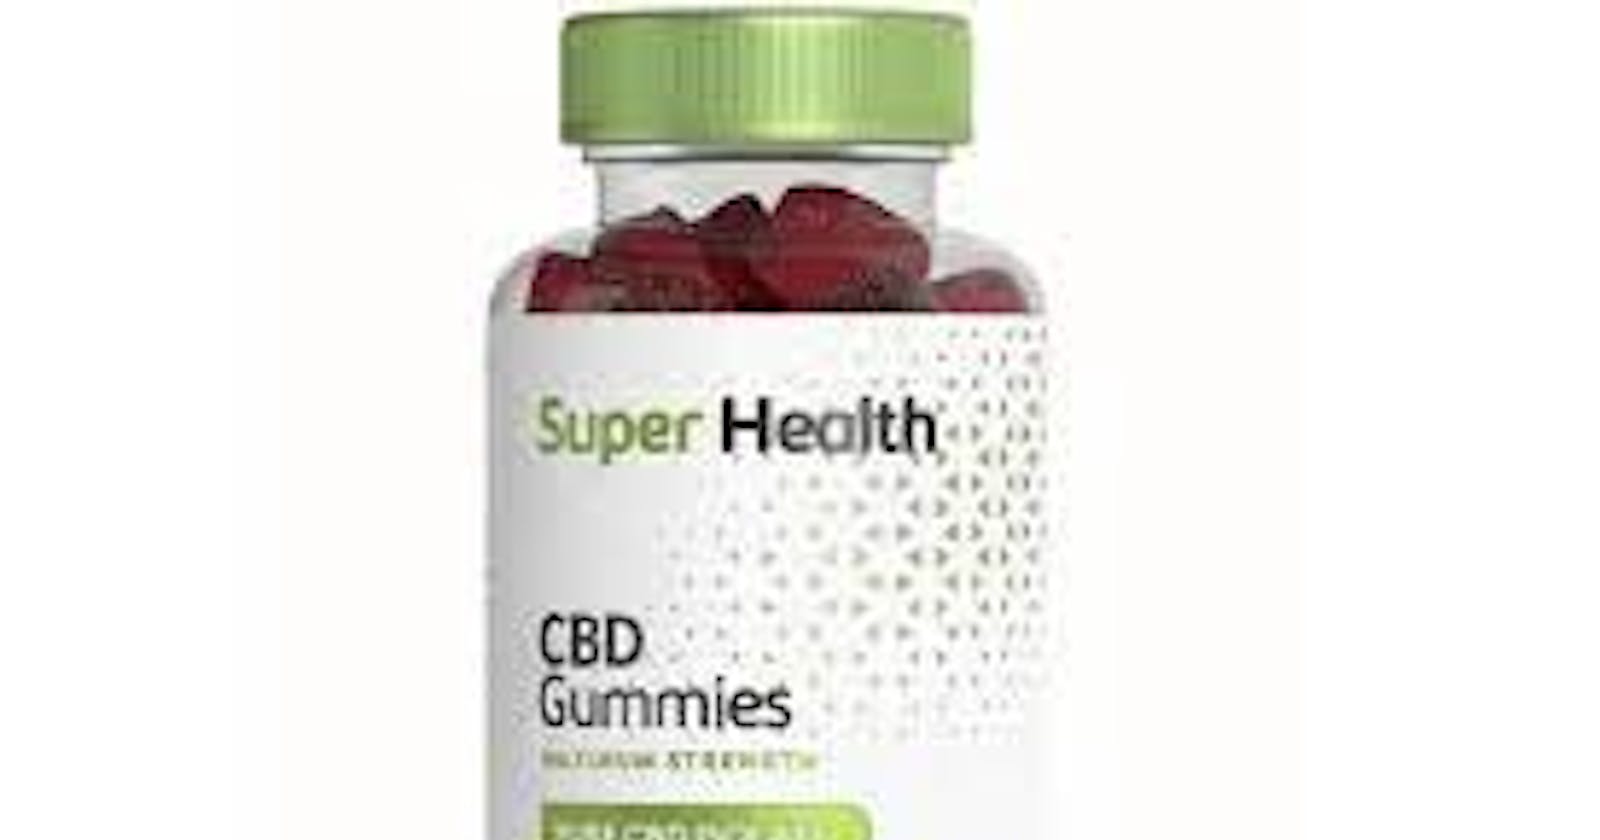 Super Health CBD Gummies Reviews - [ Scam Alerts] Is It Fake Or Trusted?